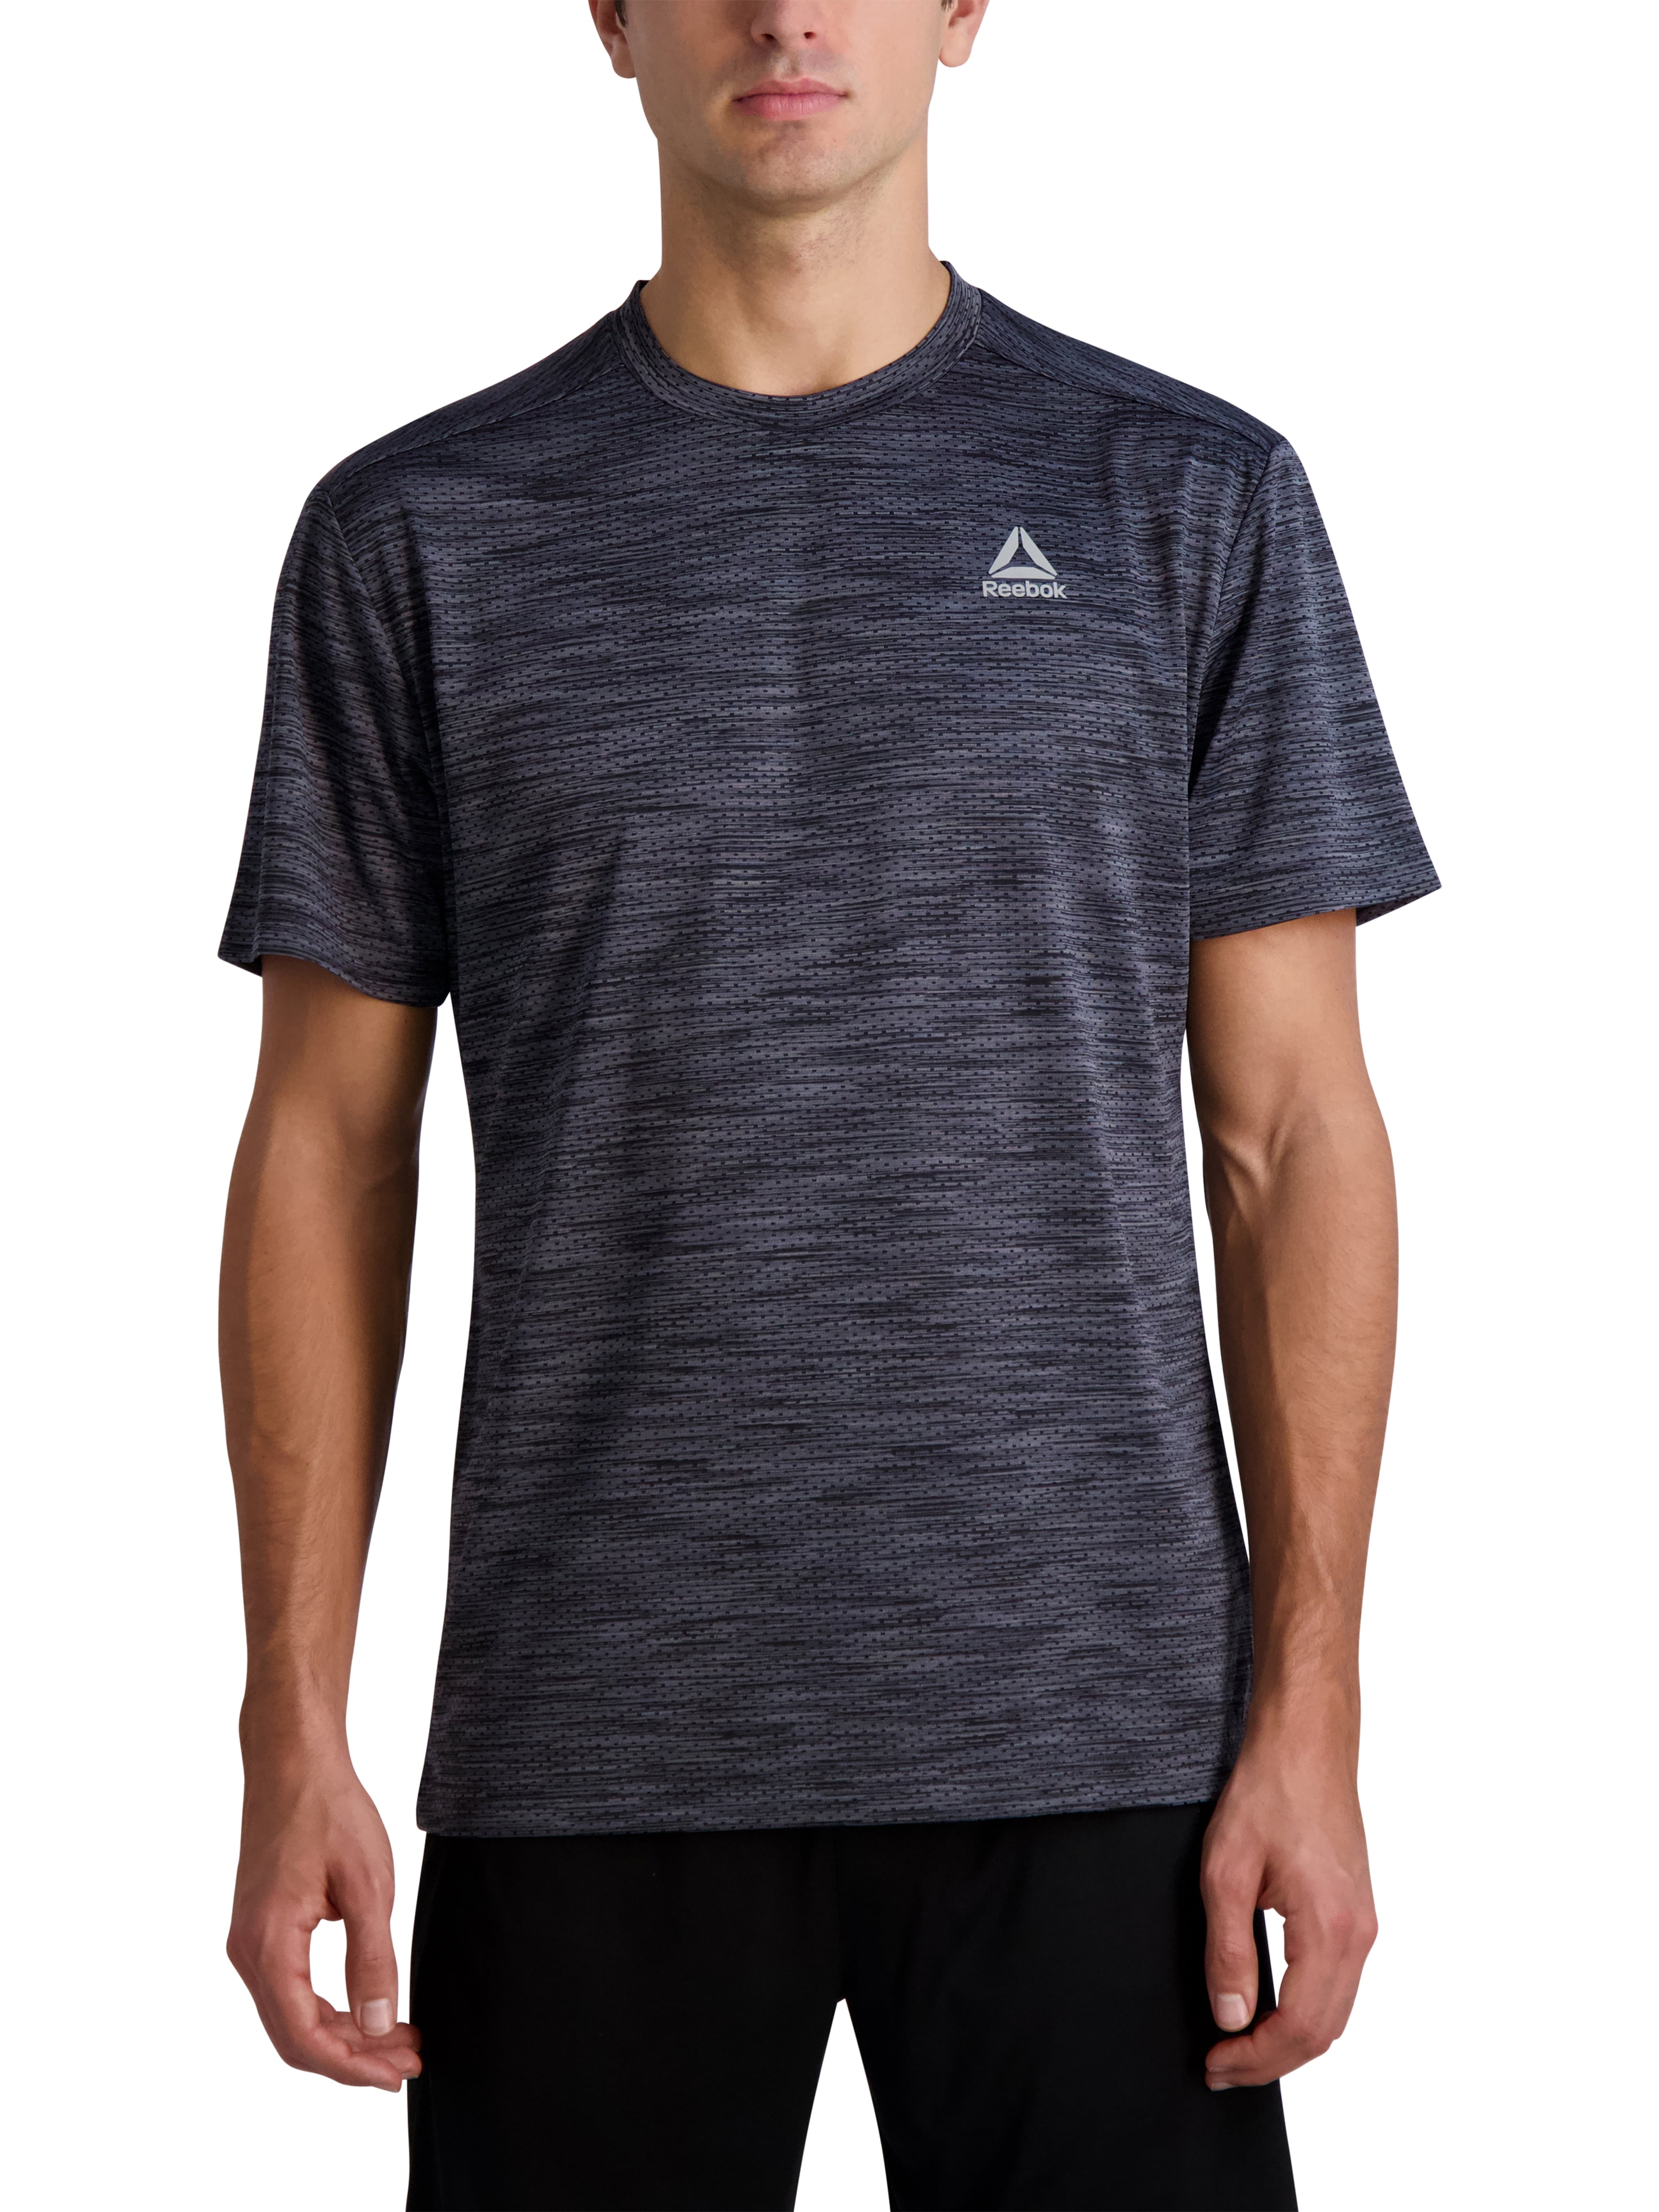 Reebok Men's and Space T-Shirt, up to size 3XL - Walmart.com